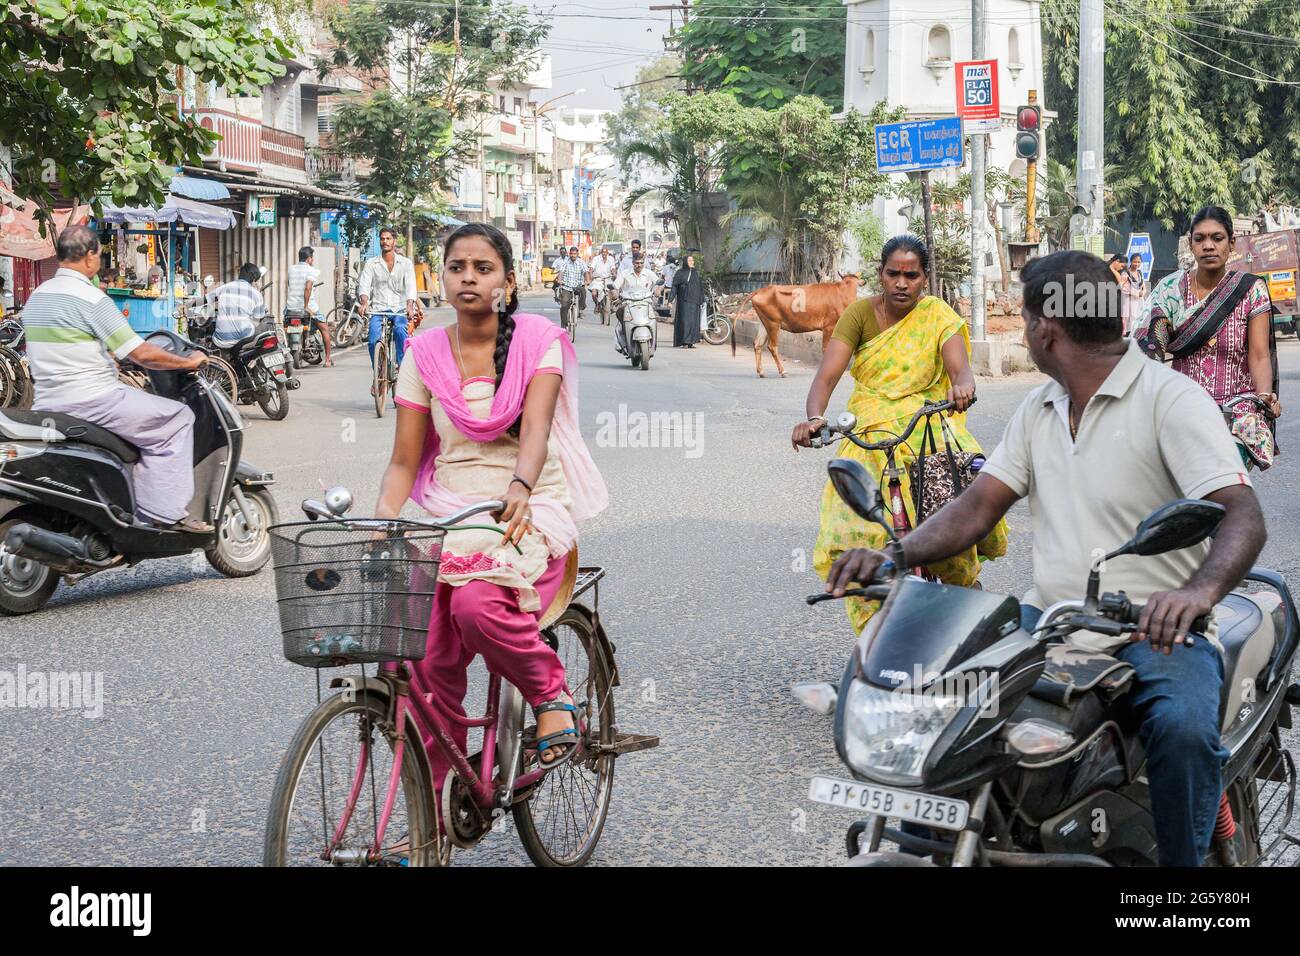 Indian females ride bicycles and males drive motorbikes during rush hour without crash helmets in traffic, Puducherry (Pondicherry), Tamil Nadu, India Stock Photo